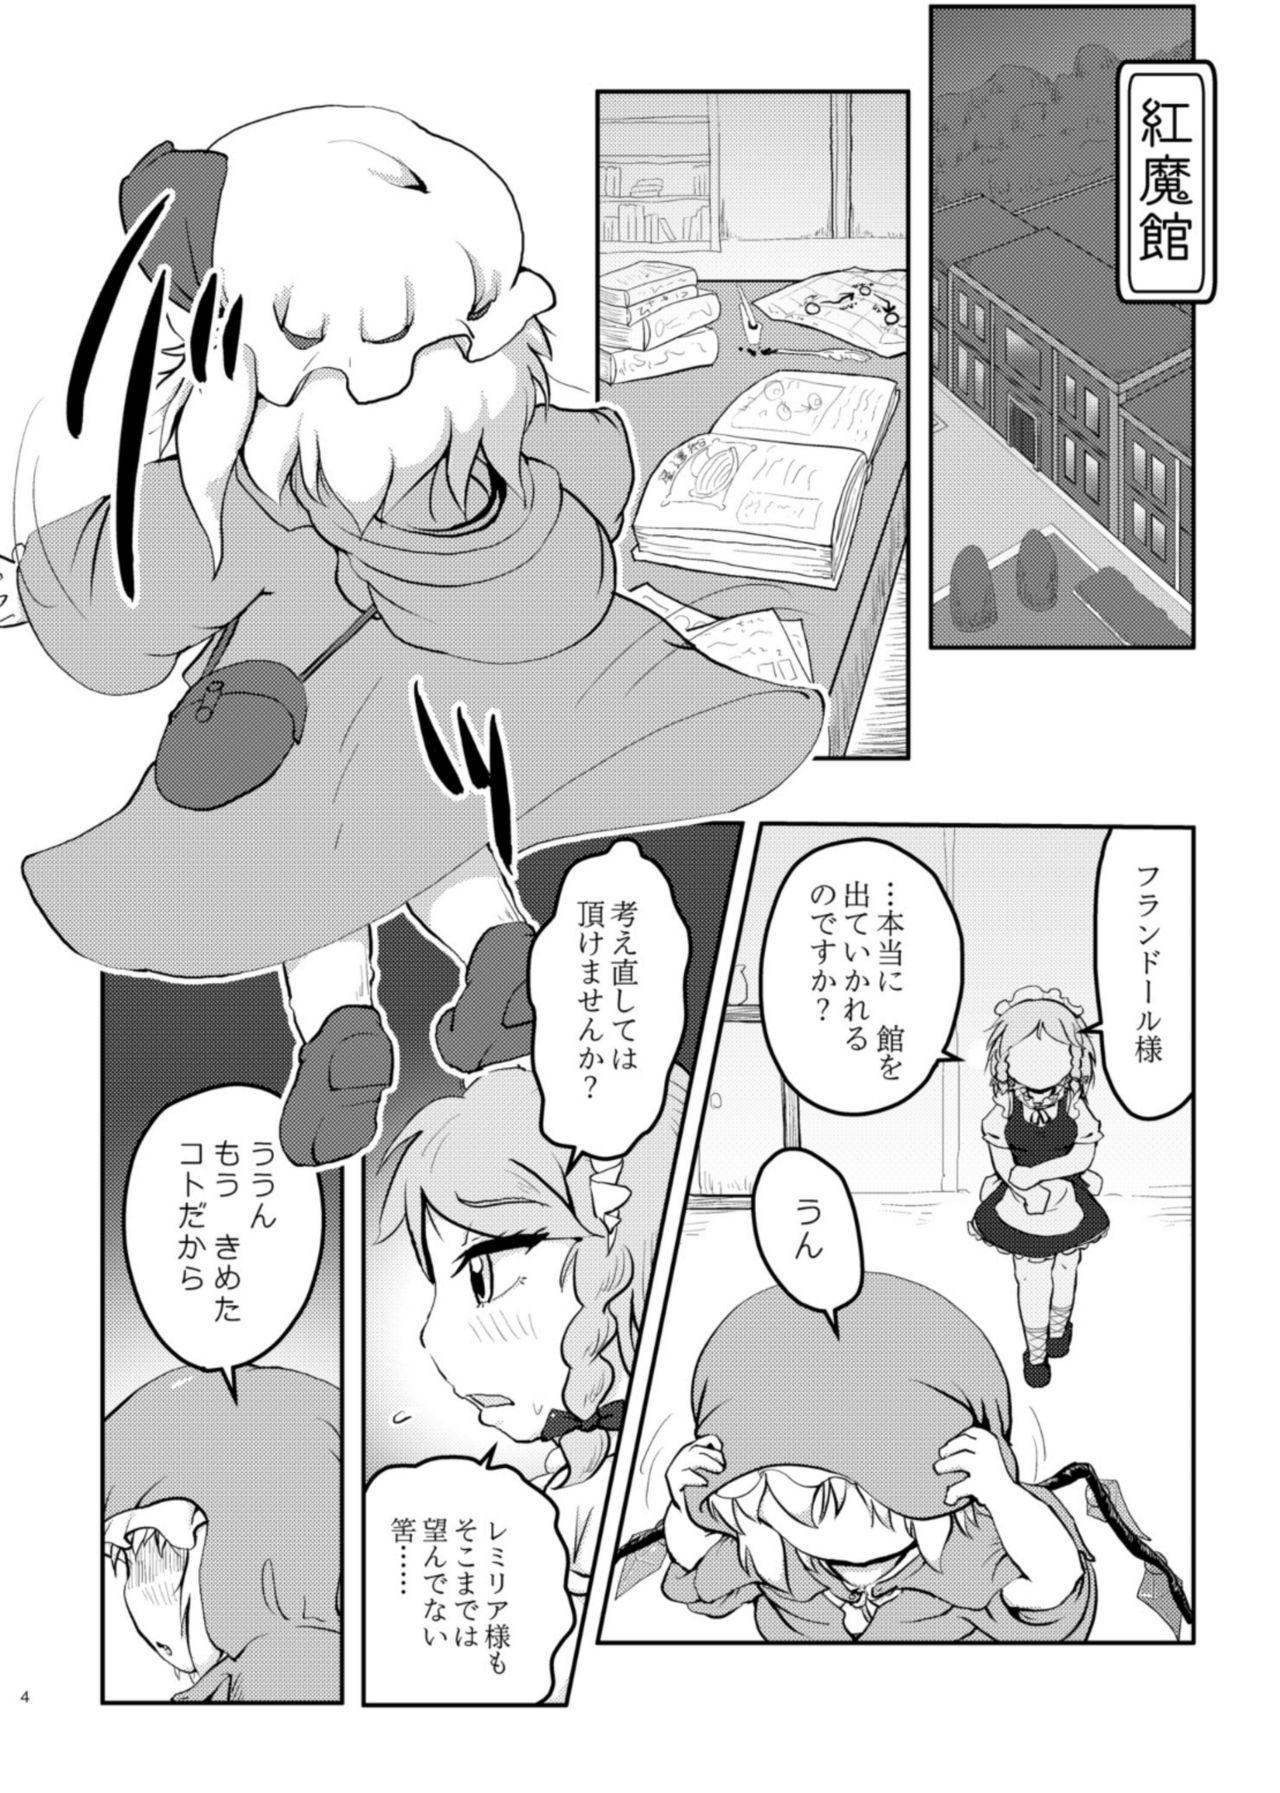 Tgirl Scarlet Conflict 2 - Touhou project Dirty Talk - Page 4